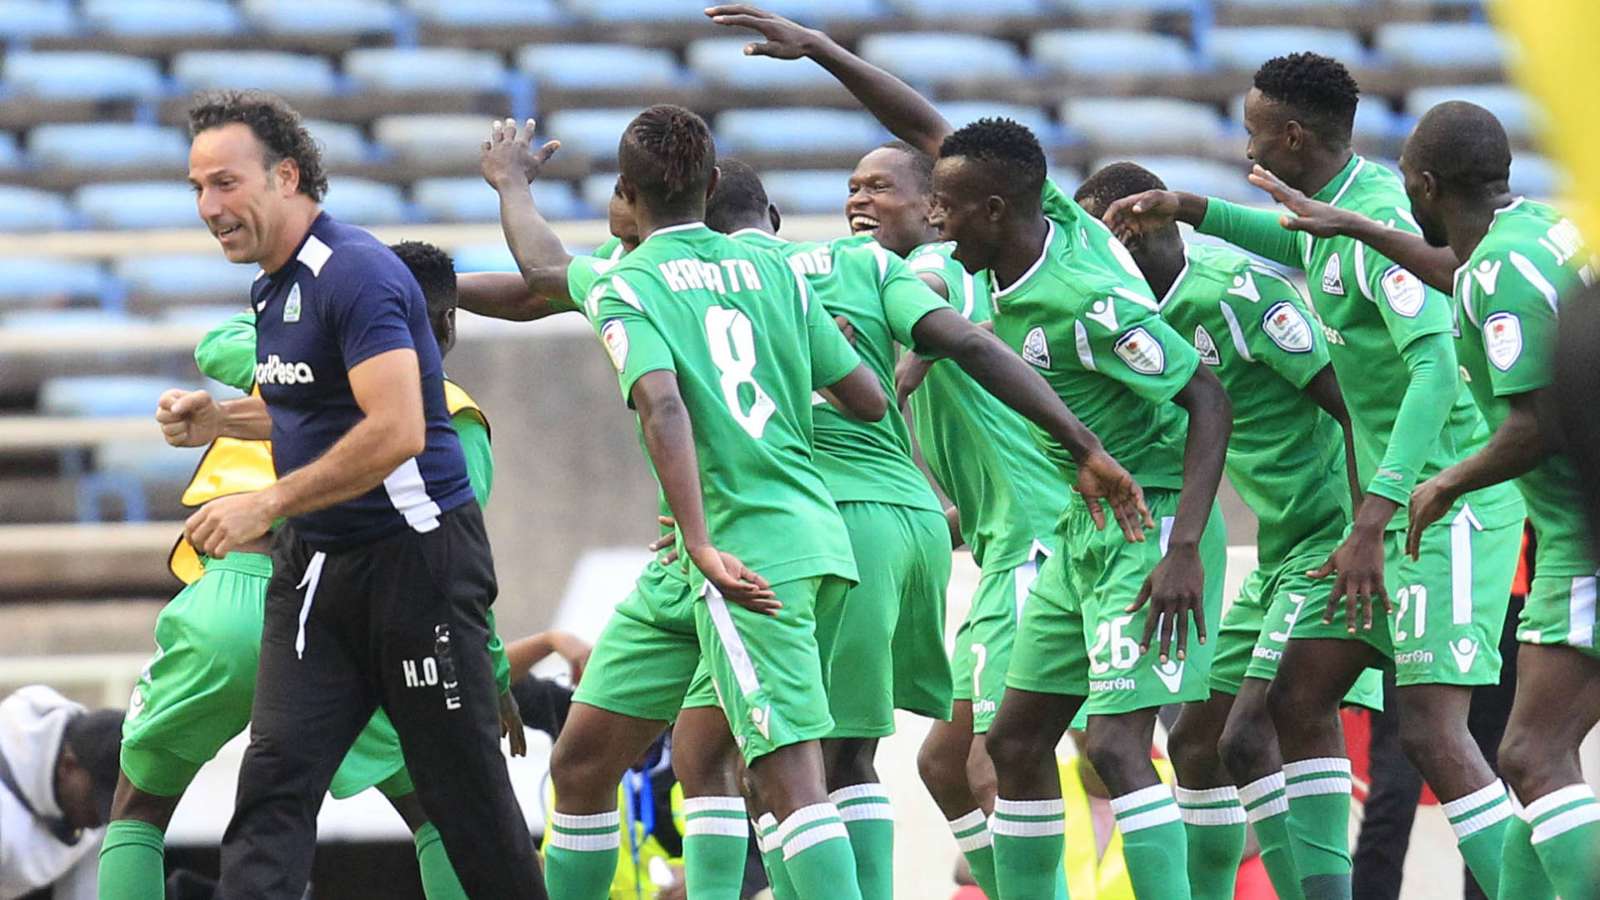 Gor Mahia retains KPL title for the third time after 1-1 draw with Vihiga United | FKF Premier League